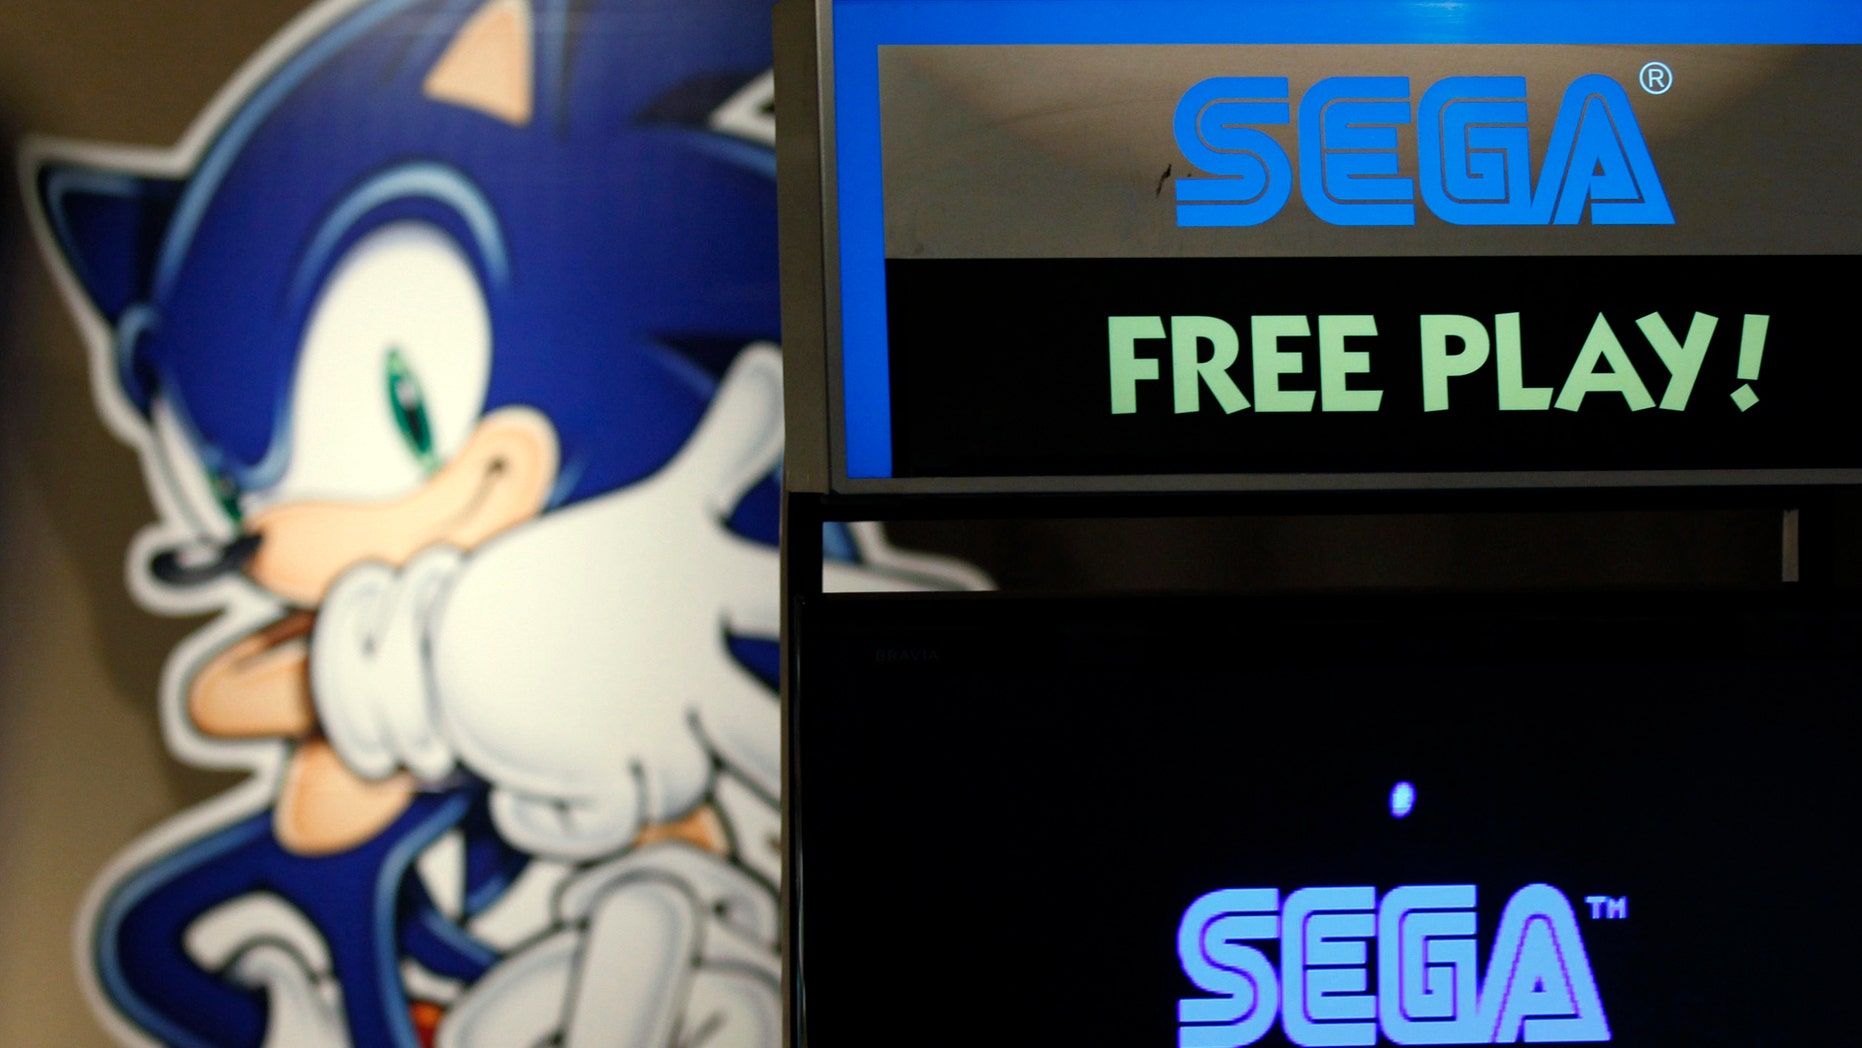 the more you play with it sega